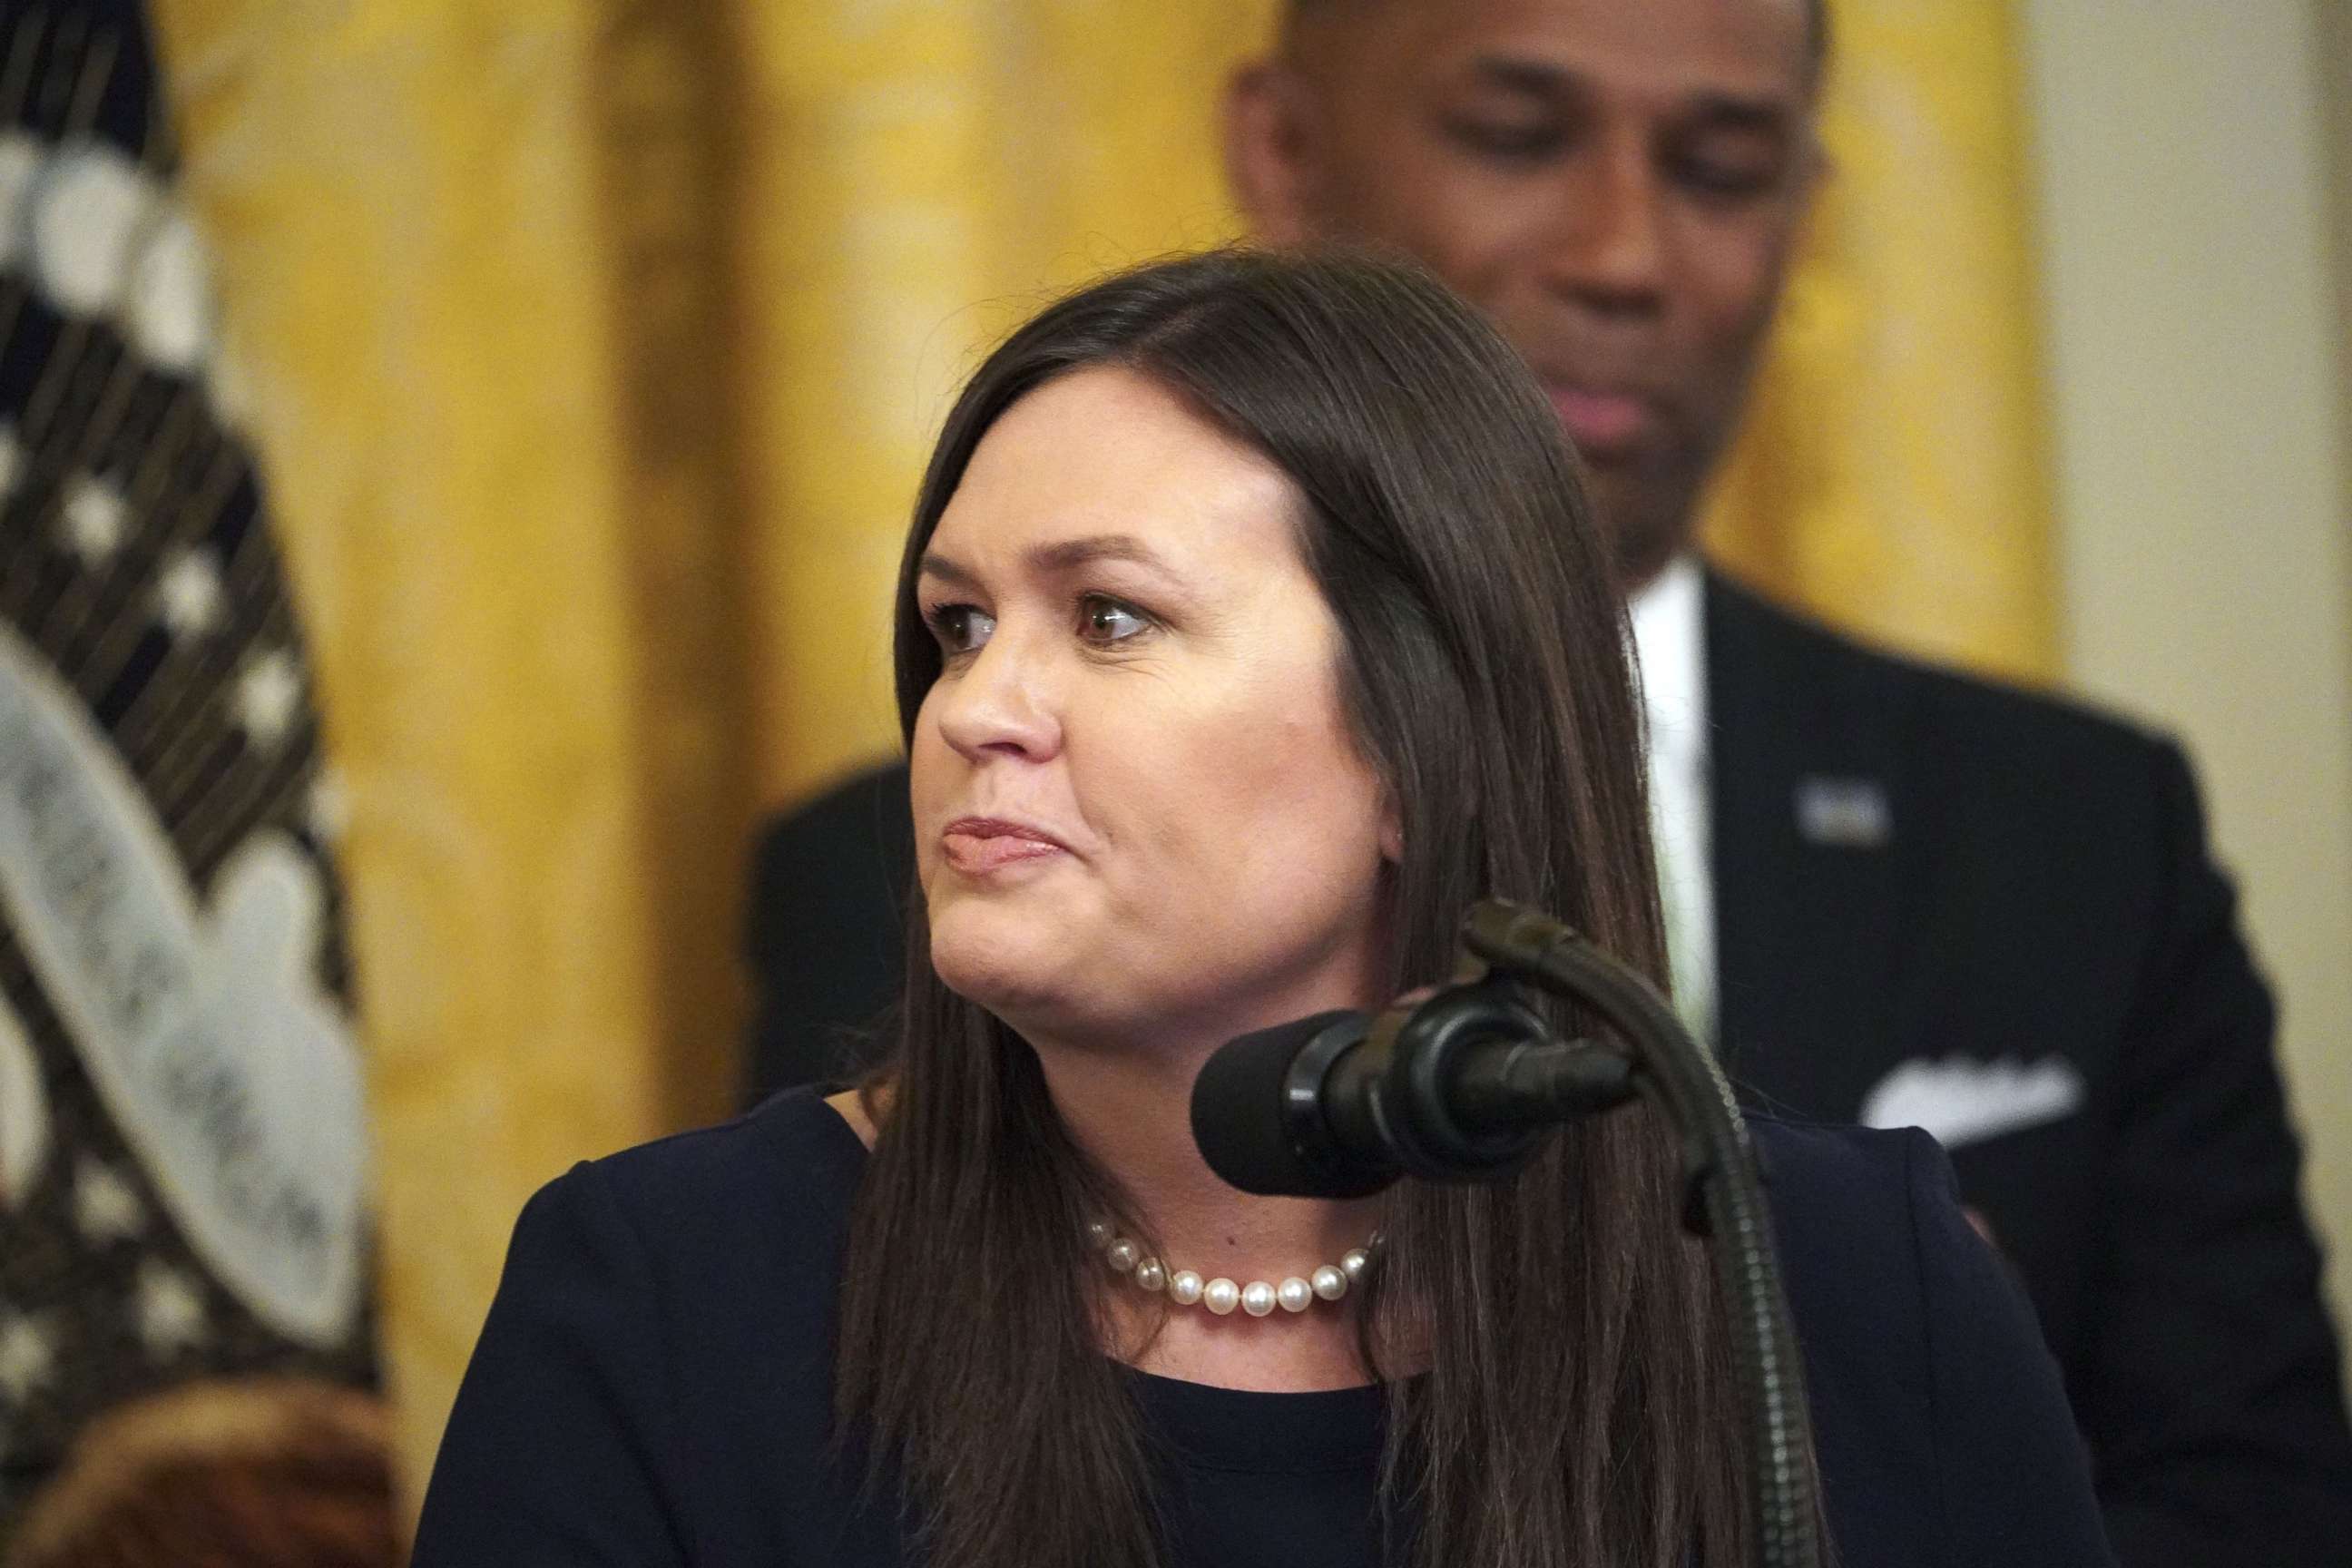 PHOTO: Sarah Sanders speaks as President Donald Trump holds an event about second chance hiring and criminal justice reform in the East Room of the White House, June 13, 2019.